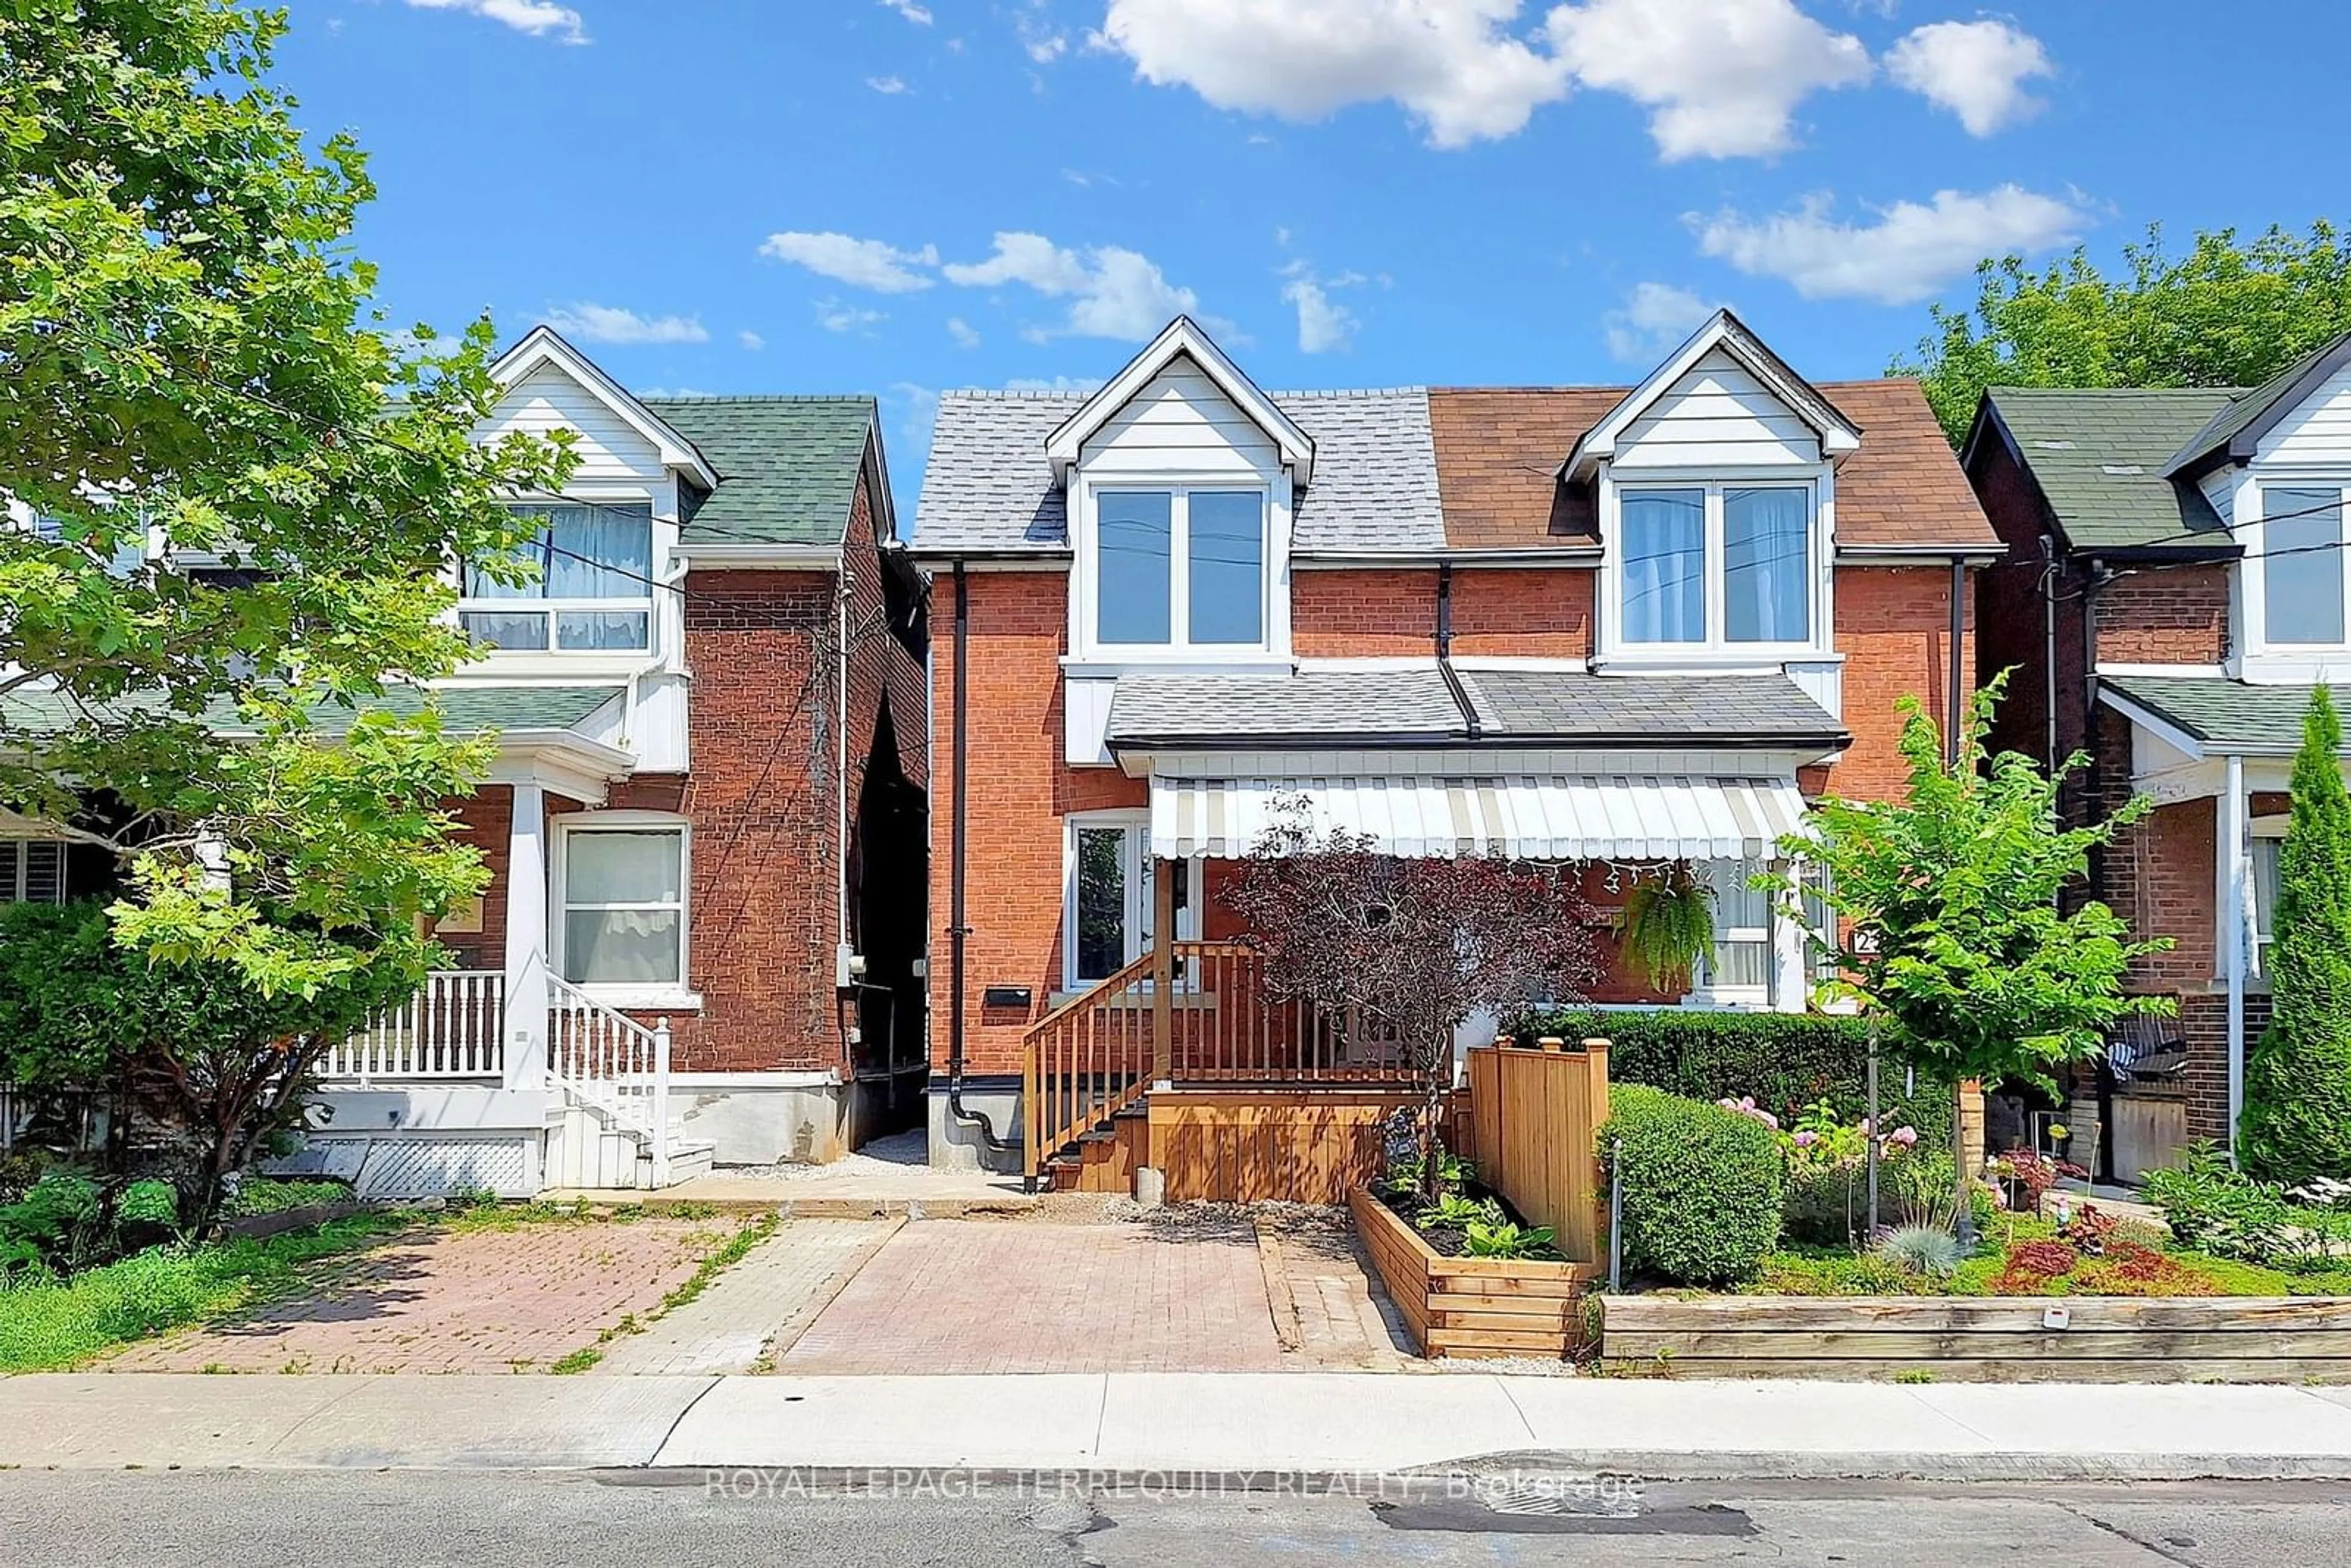 Home with brick exterior material for 25 Sibley Ave, Toronto Ontario M4C 5E8